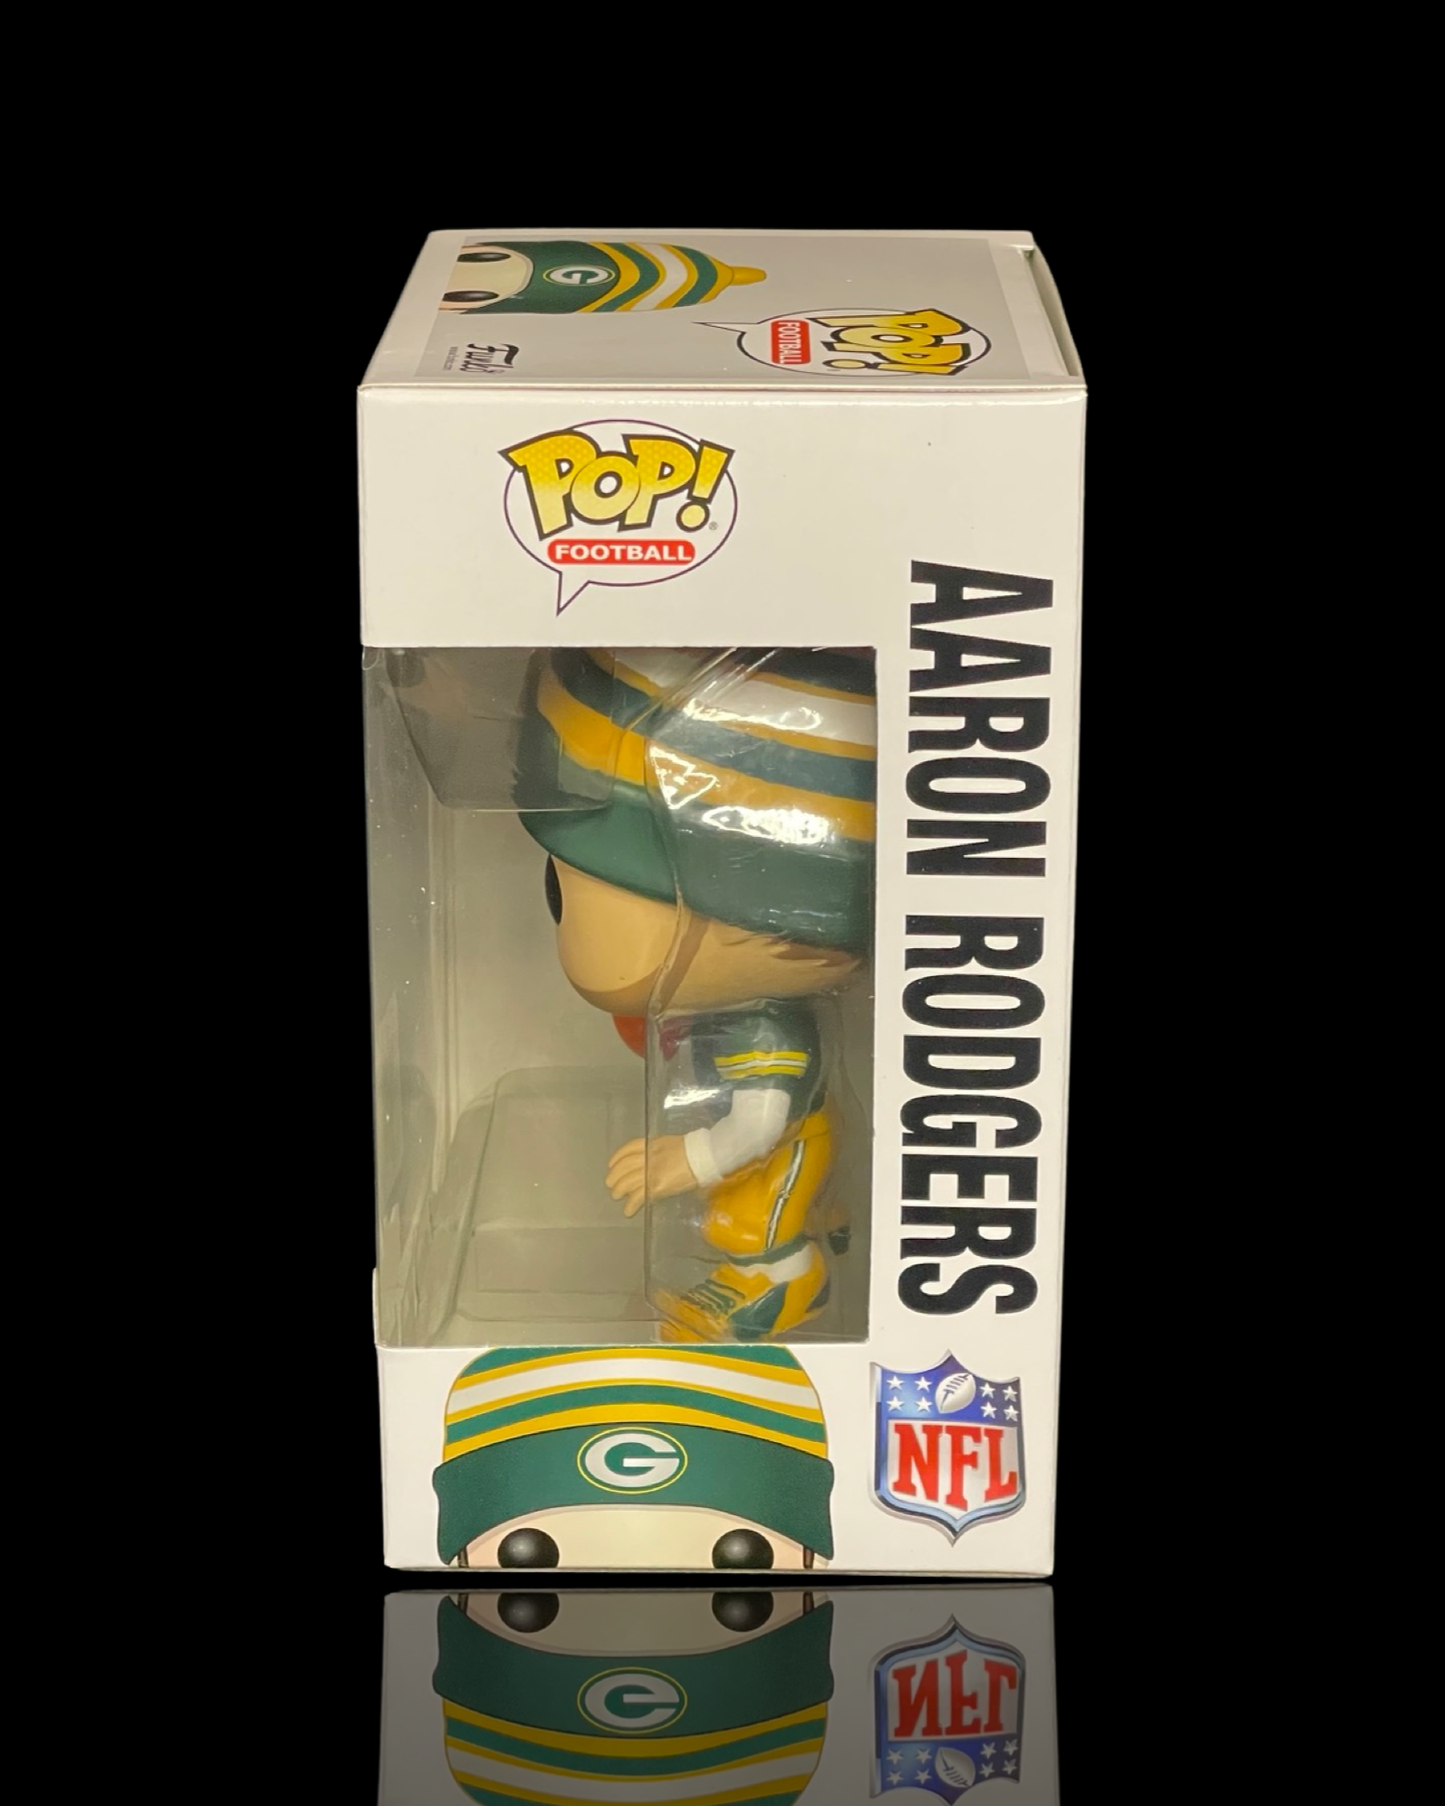 NFL: Aaron Rodgers Green Bay Packers